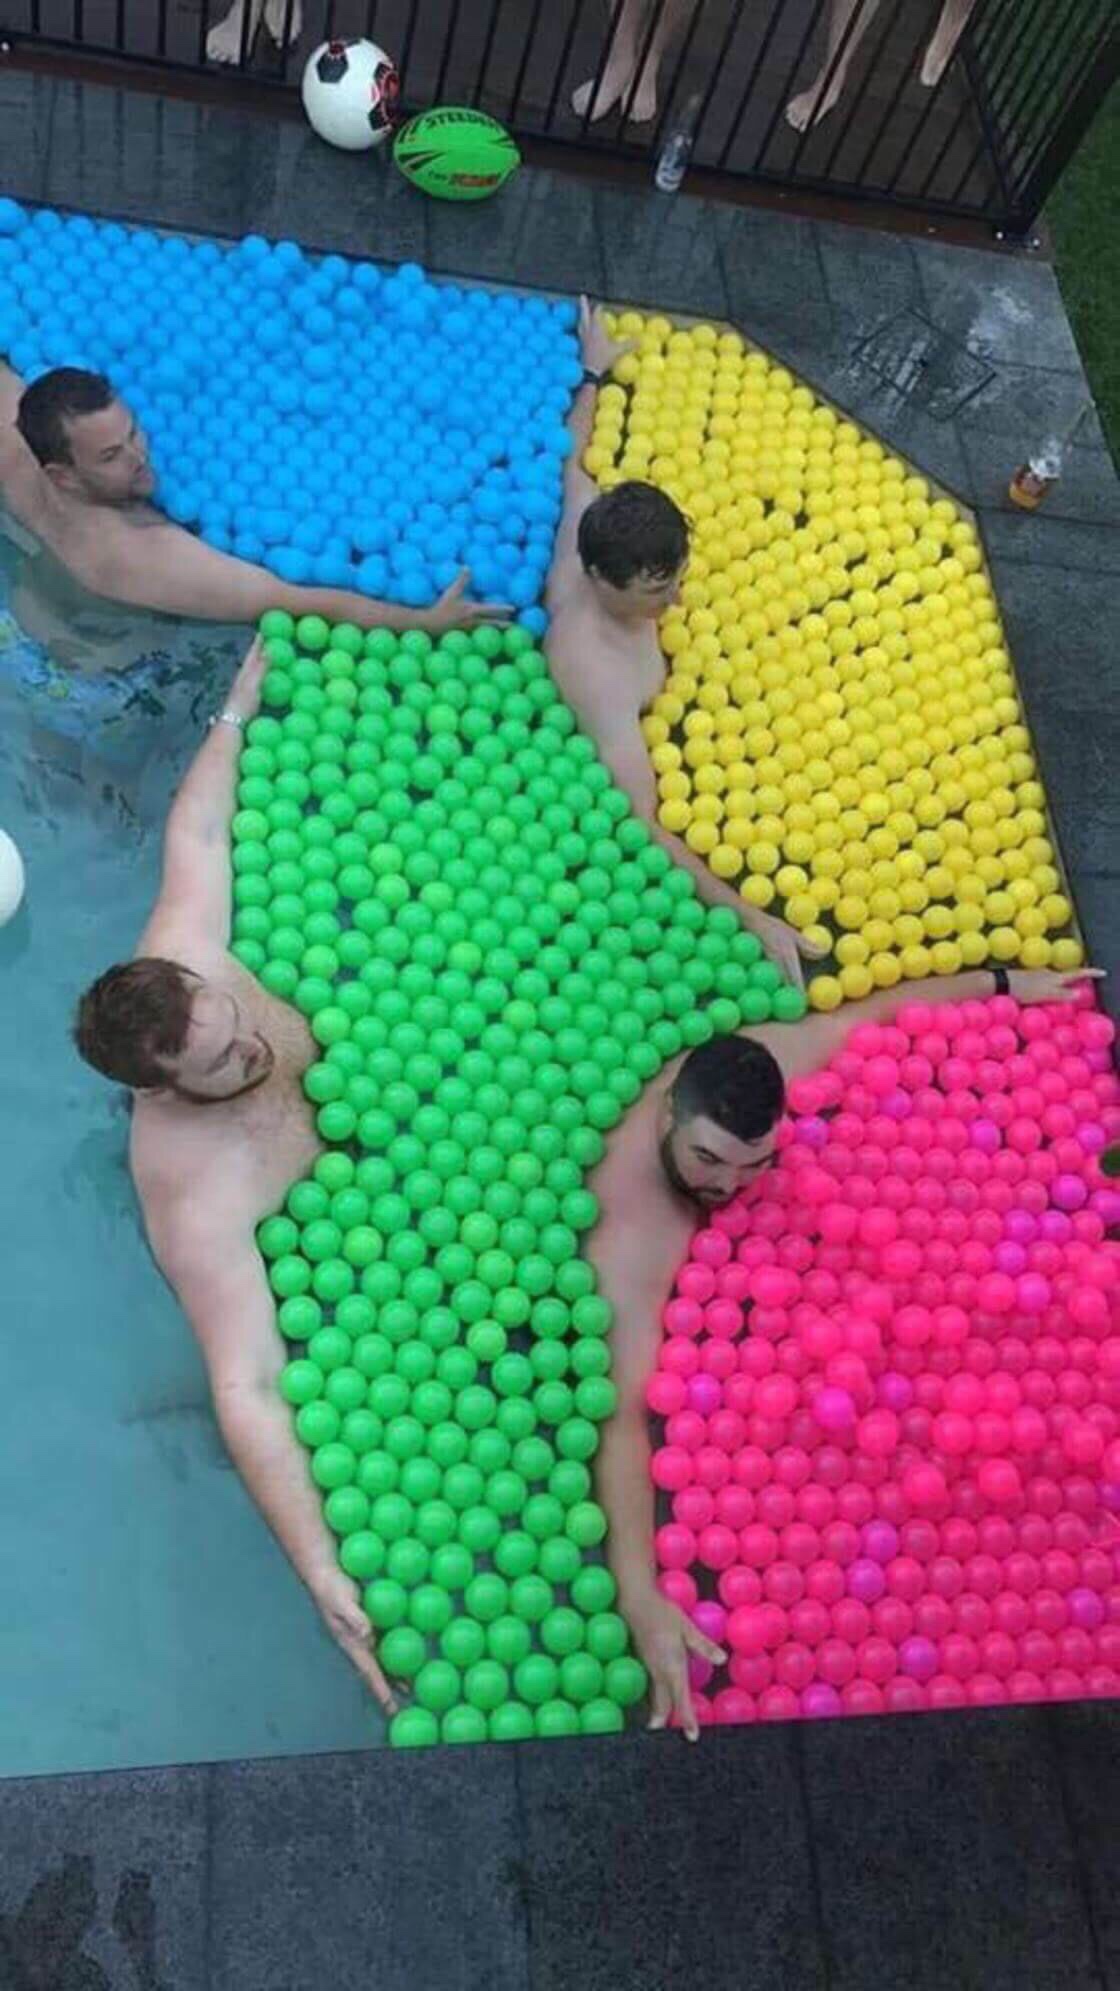 strange image of men holding balls of various colors together in swimming pool